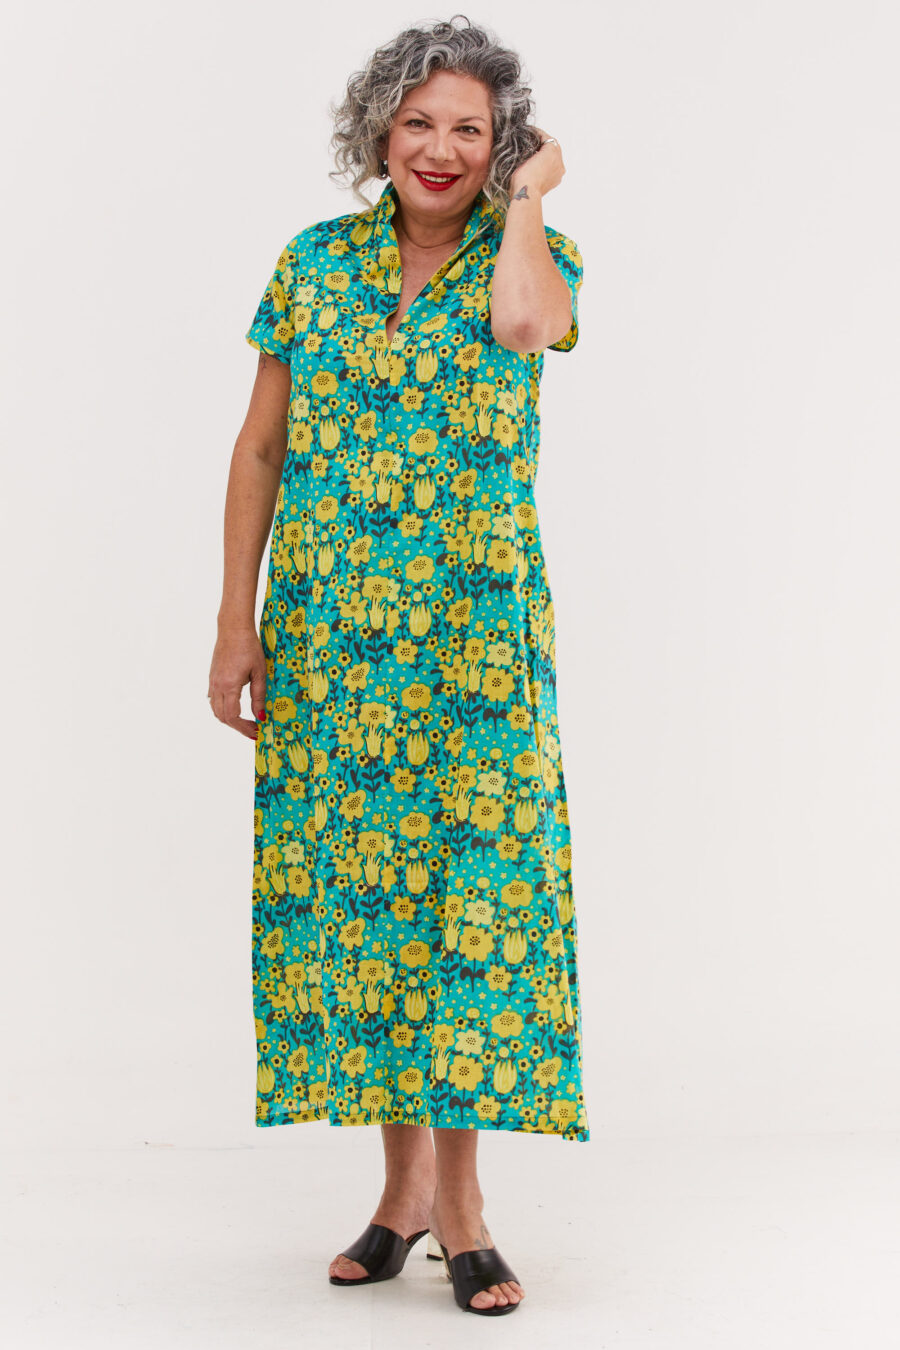 Maiko dress | Japanese dress with a unique high collar – Optimism print, tourquise dress with yellow flowers print by comfort zone boutique